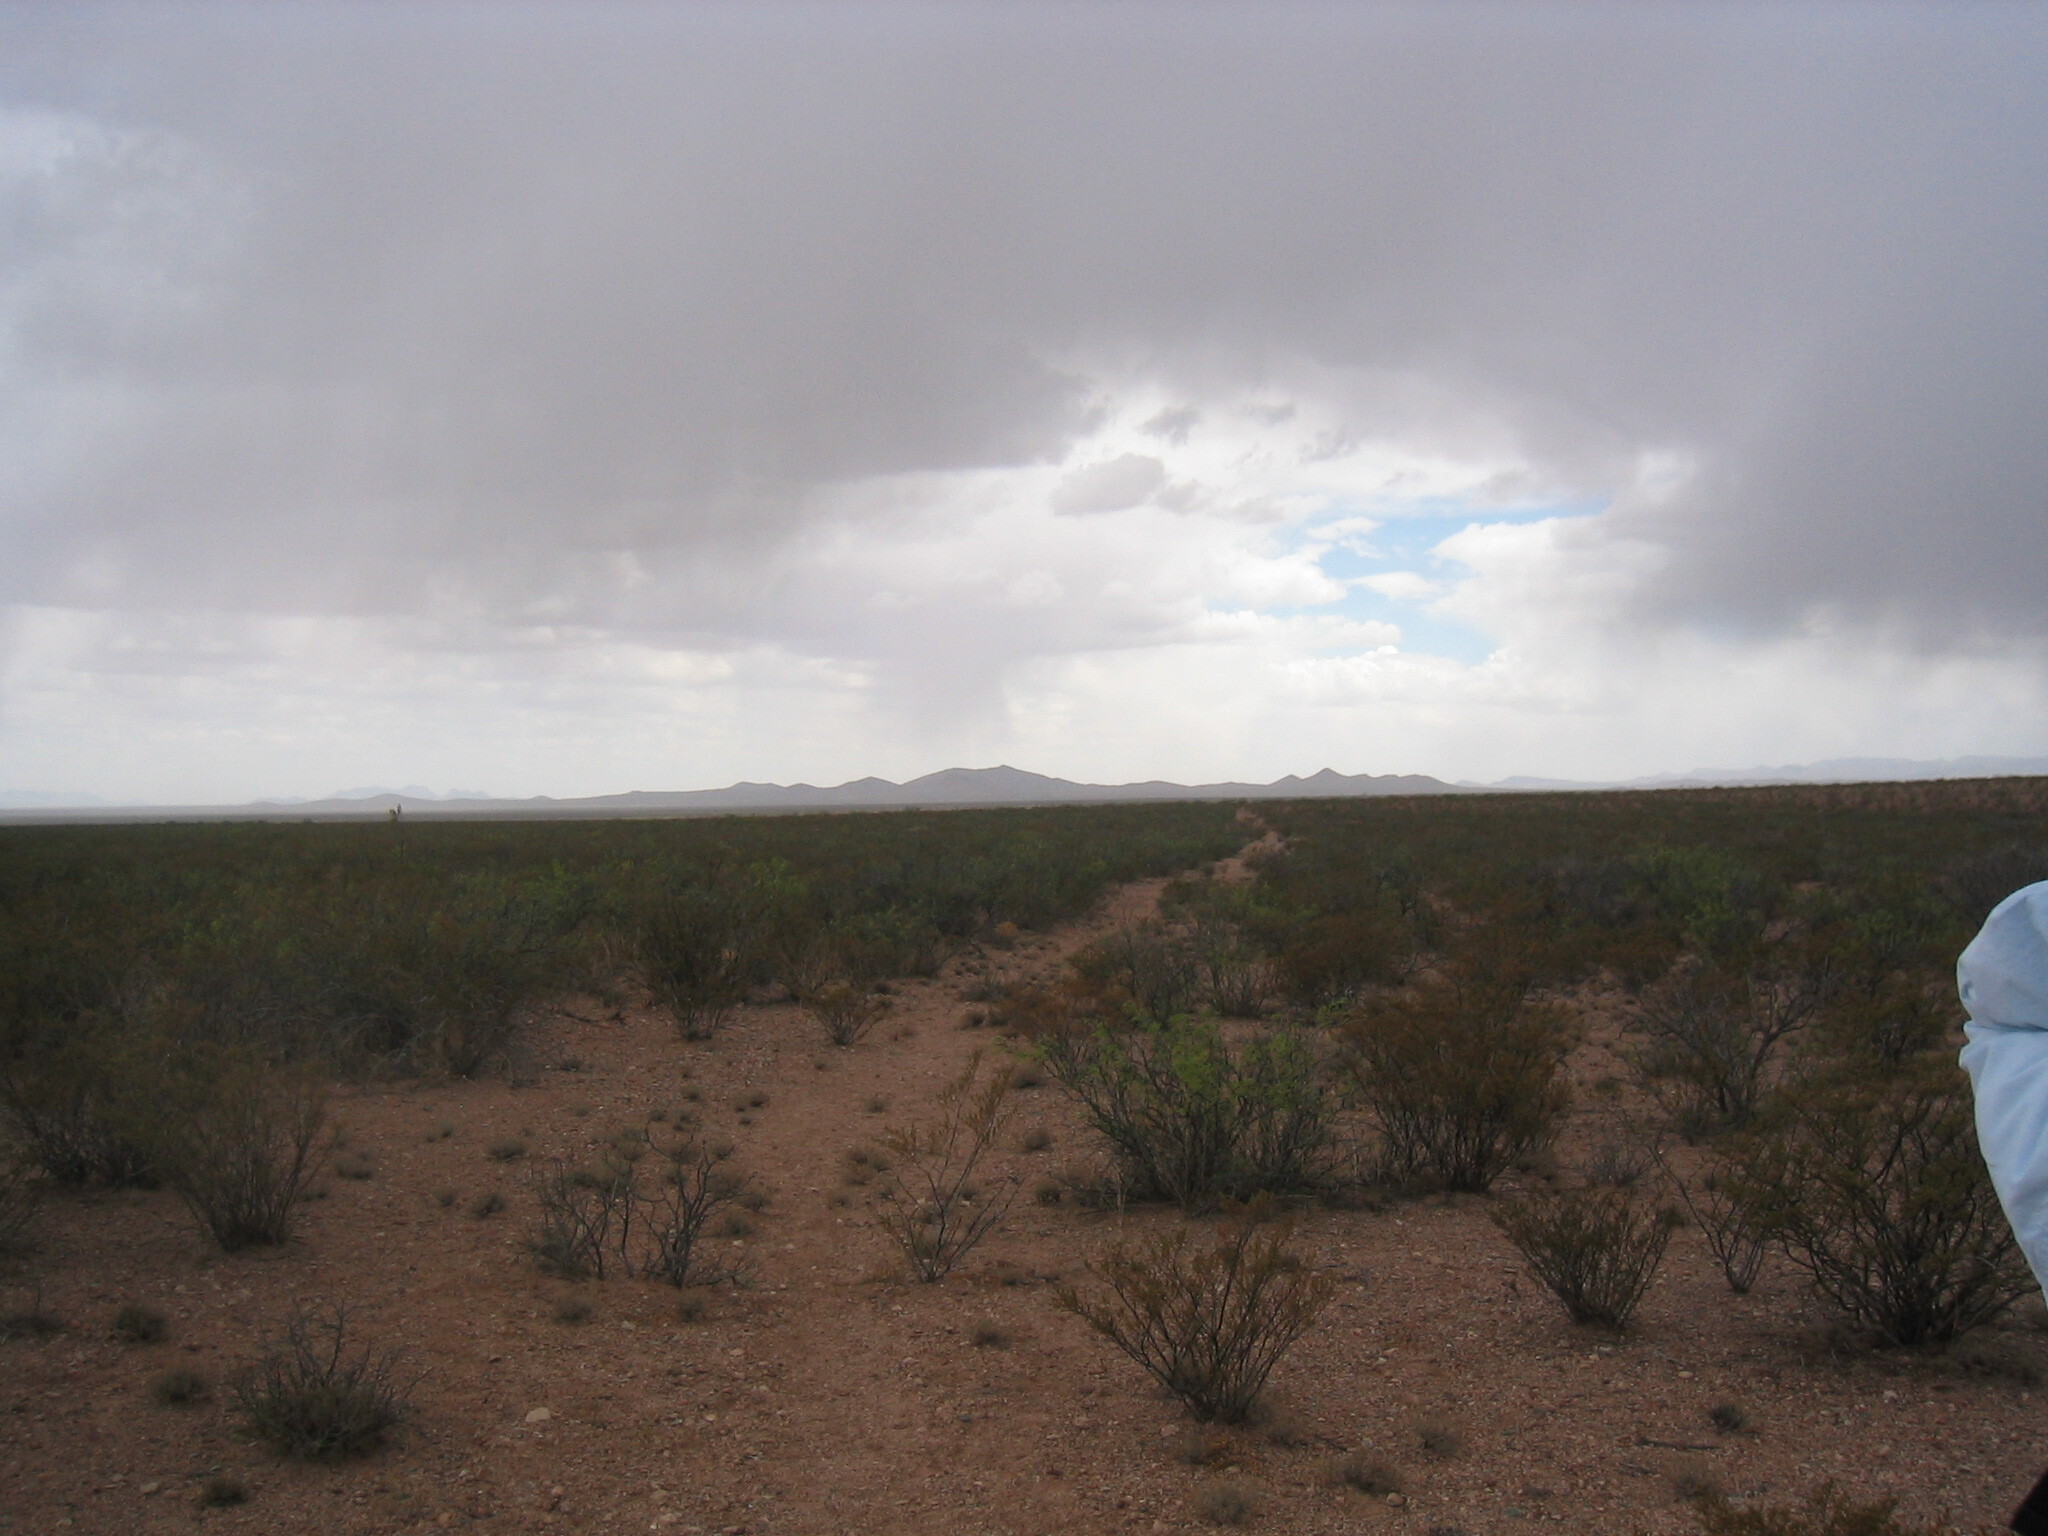 Weather moves in over the Jornada del Muerto trail in Sierra County, NM